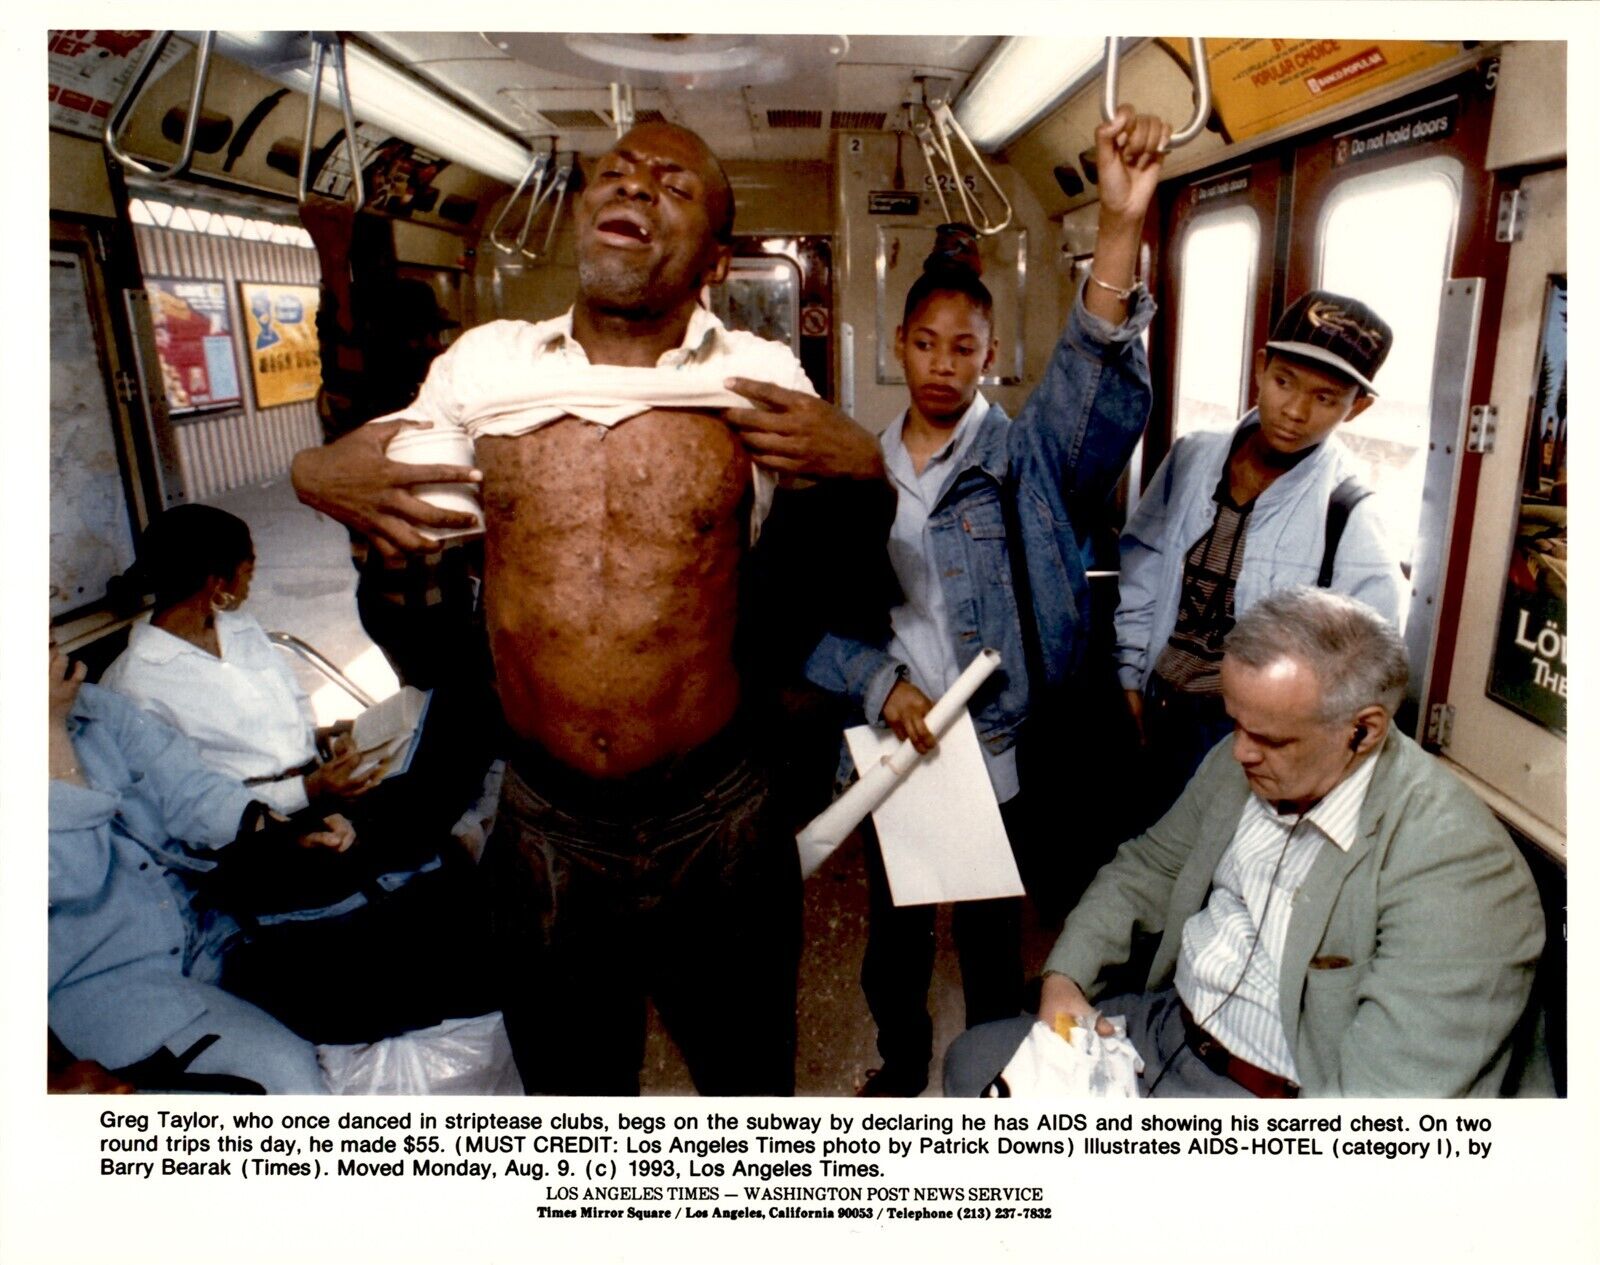 LD366 1993 Original Color Photo HIV-AIDS SUFFERER BEGS ON SUBWAY SCARRED CHEST